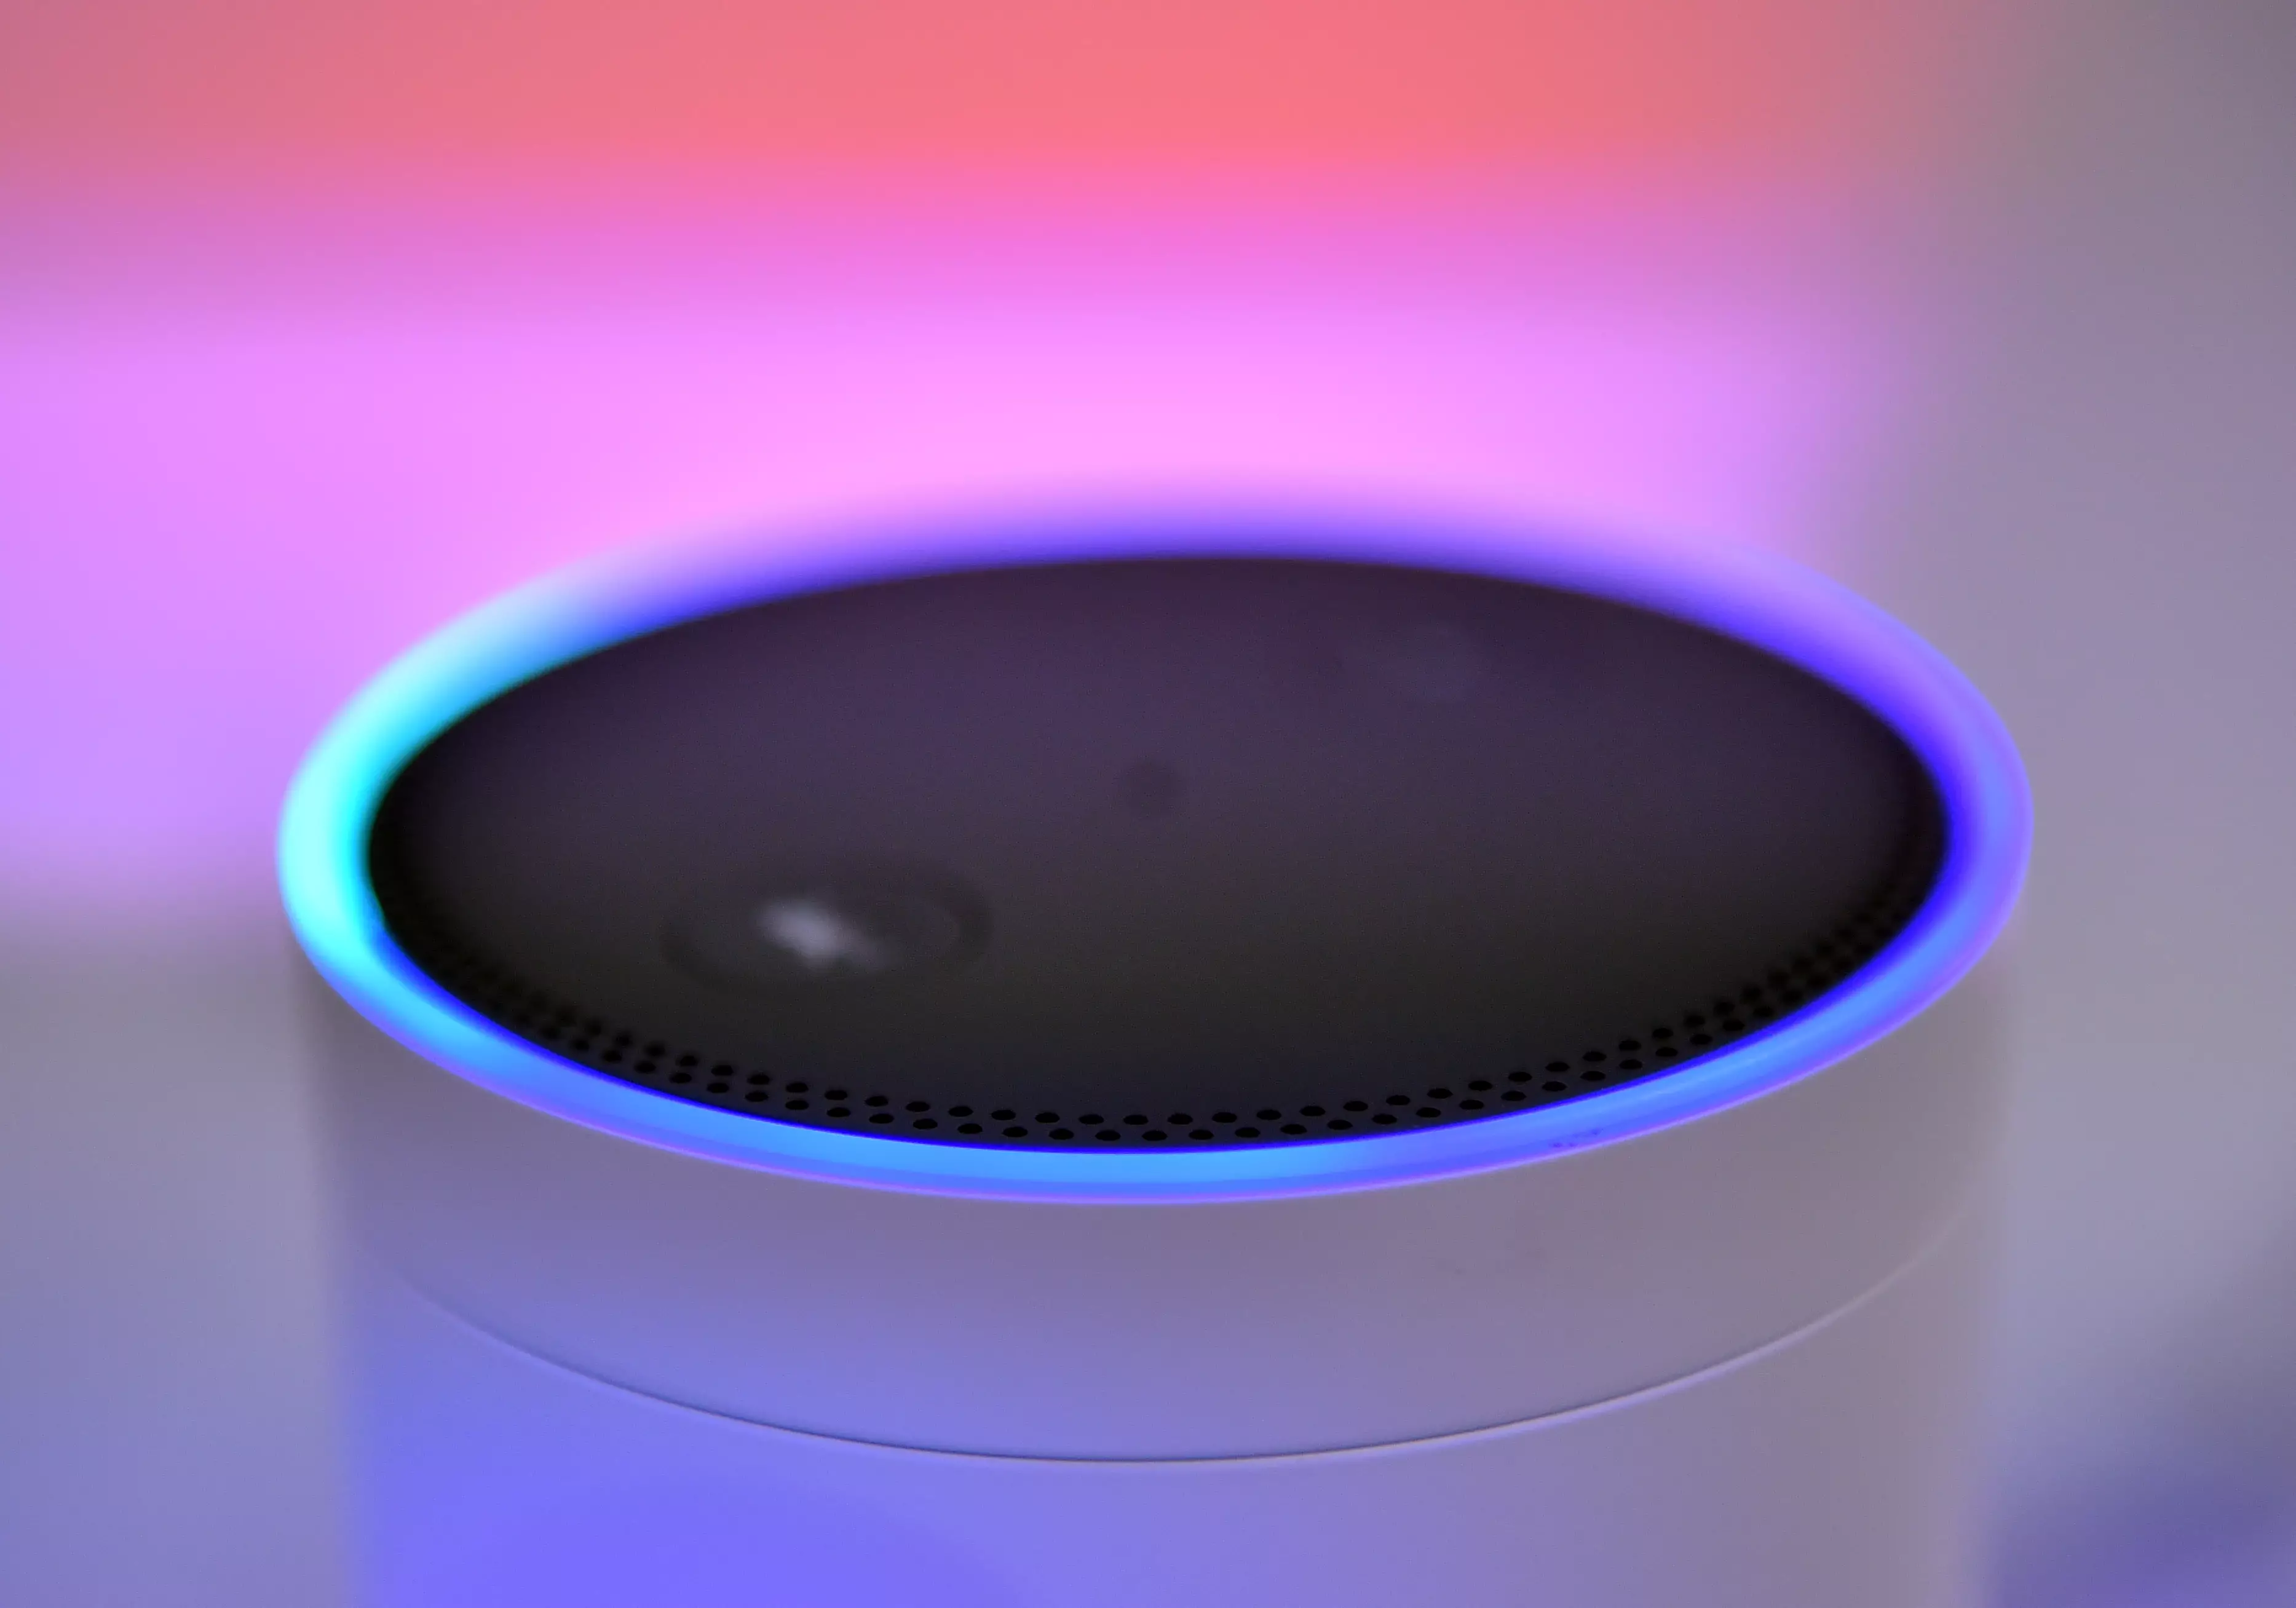 The Amazon Alexa lit up blue alerting Bella of the post on its way (